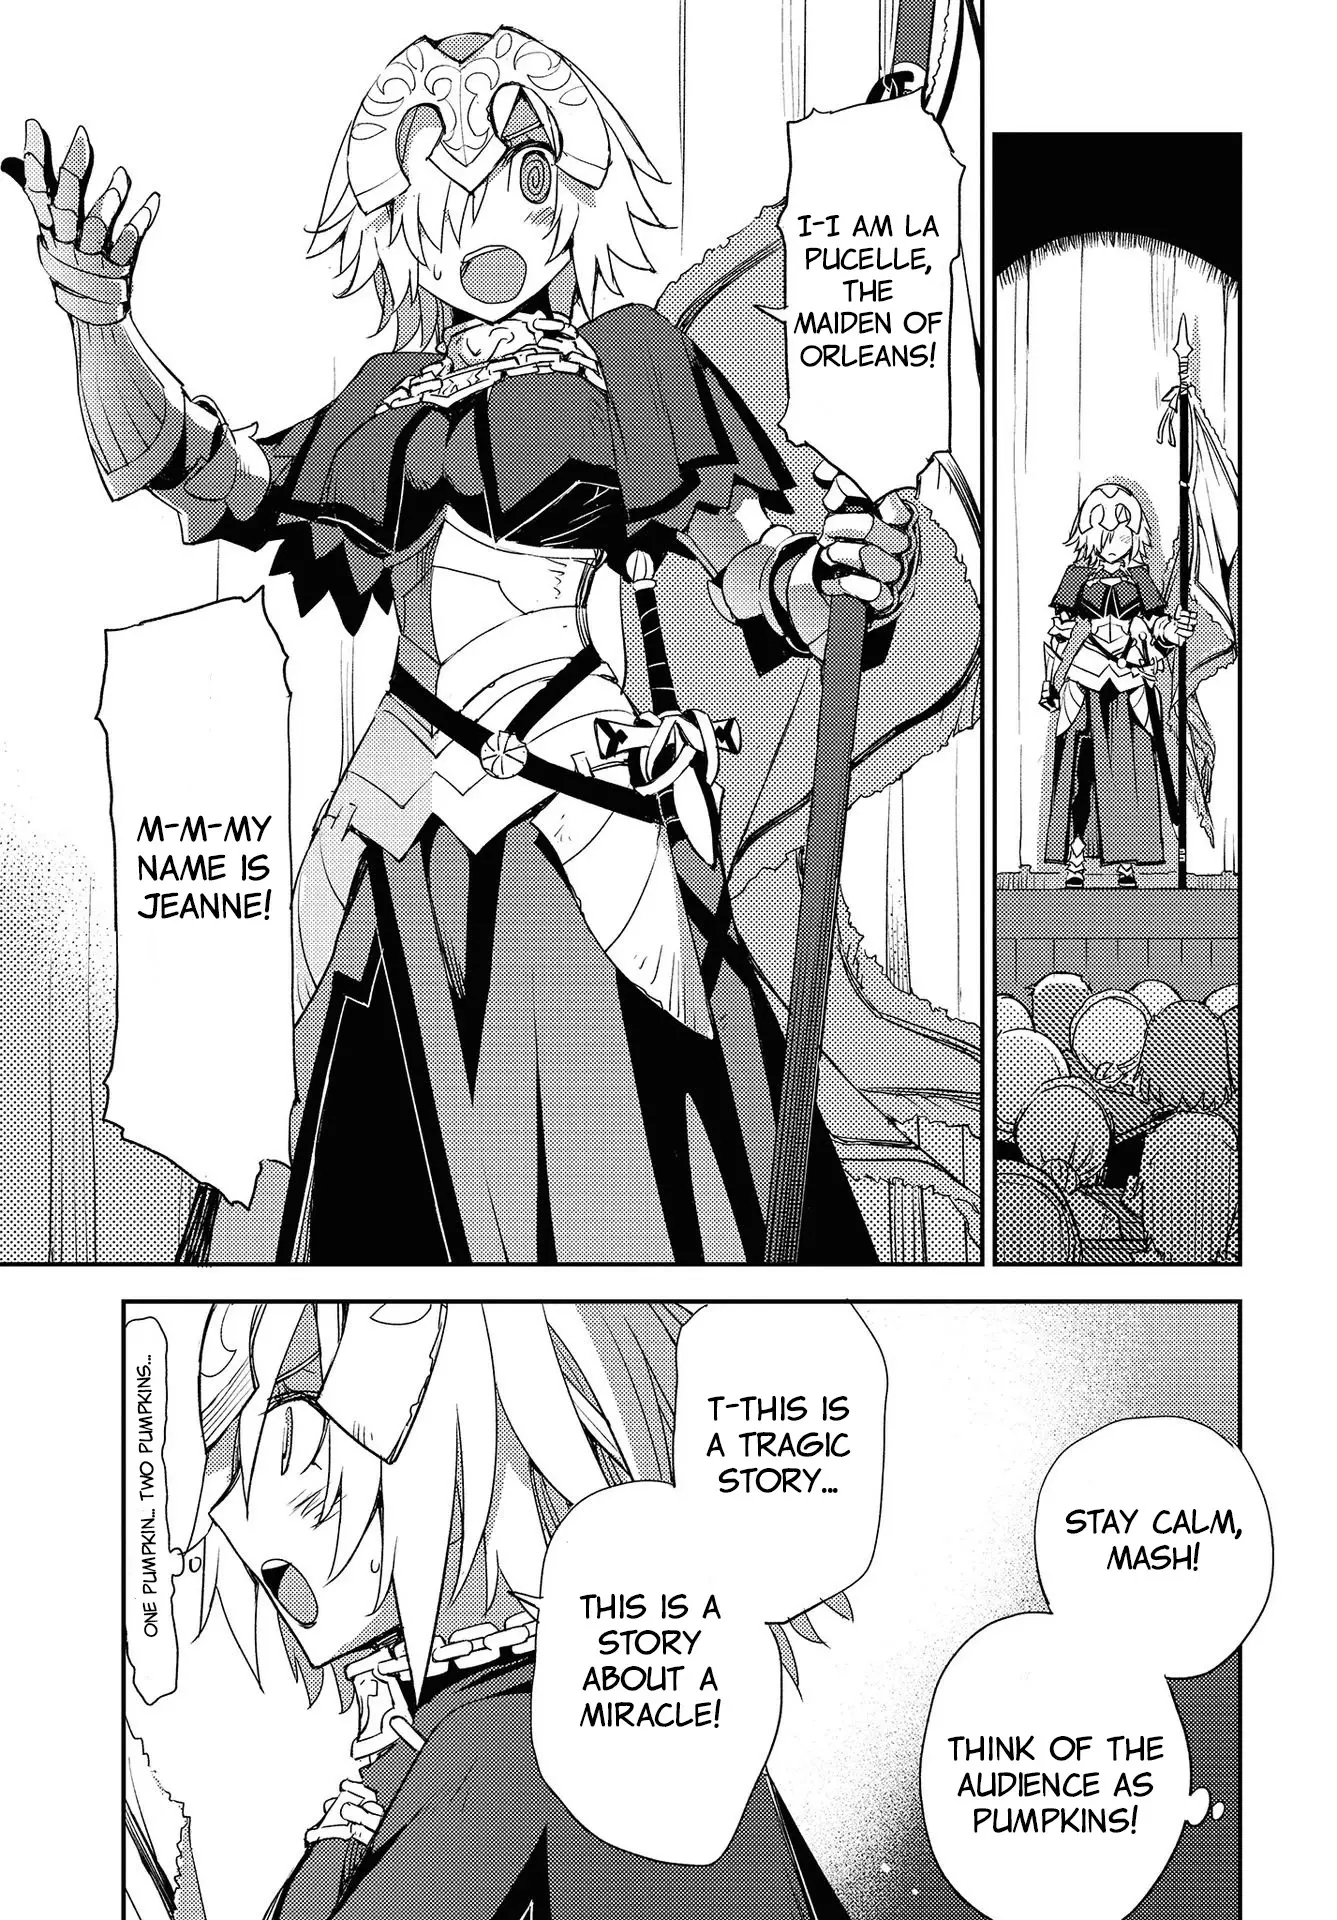 Fate/grand Order: Epic Of Remnant - Subspecies Singularity Iv: Taboo Advent Salem: Salem Of Heresy - 13 page 16